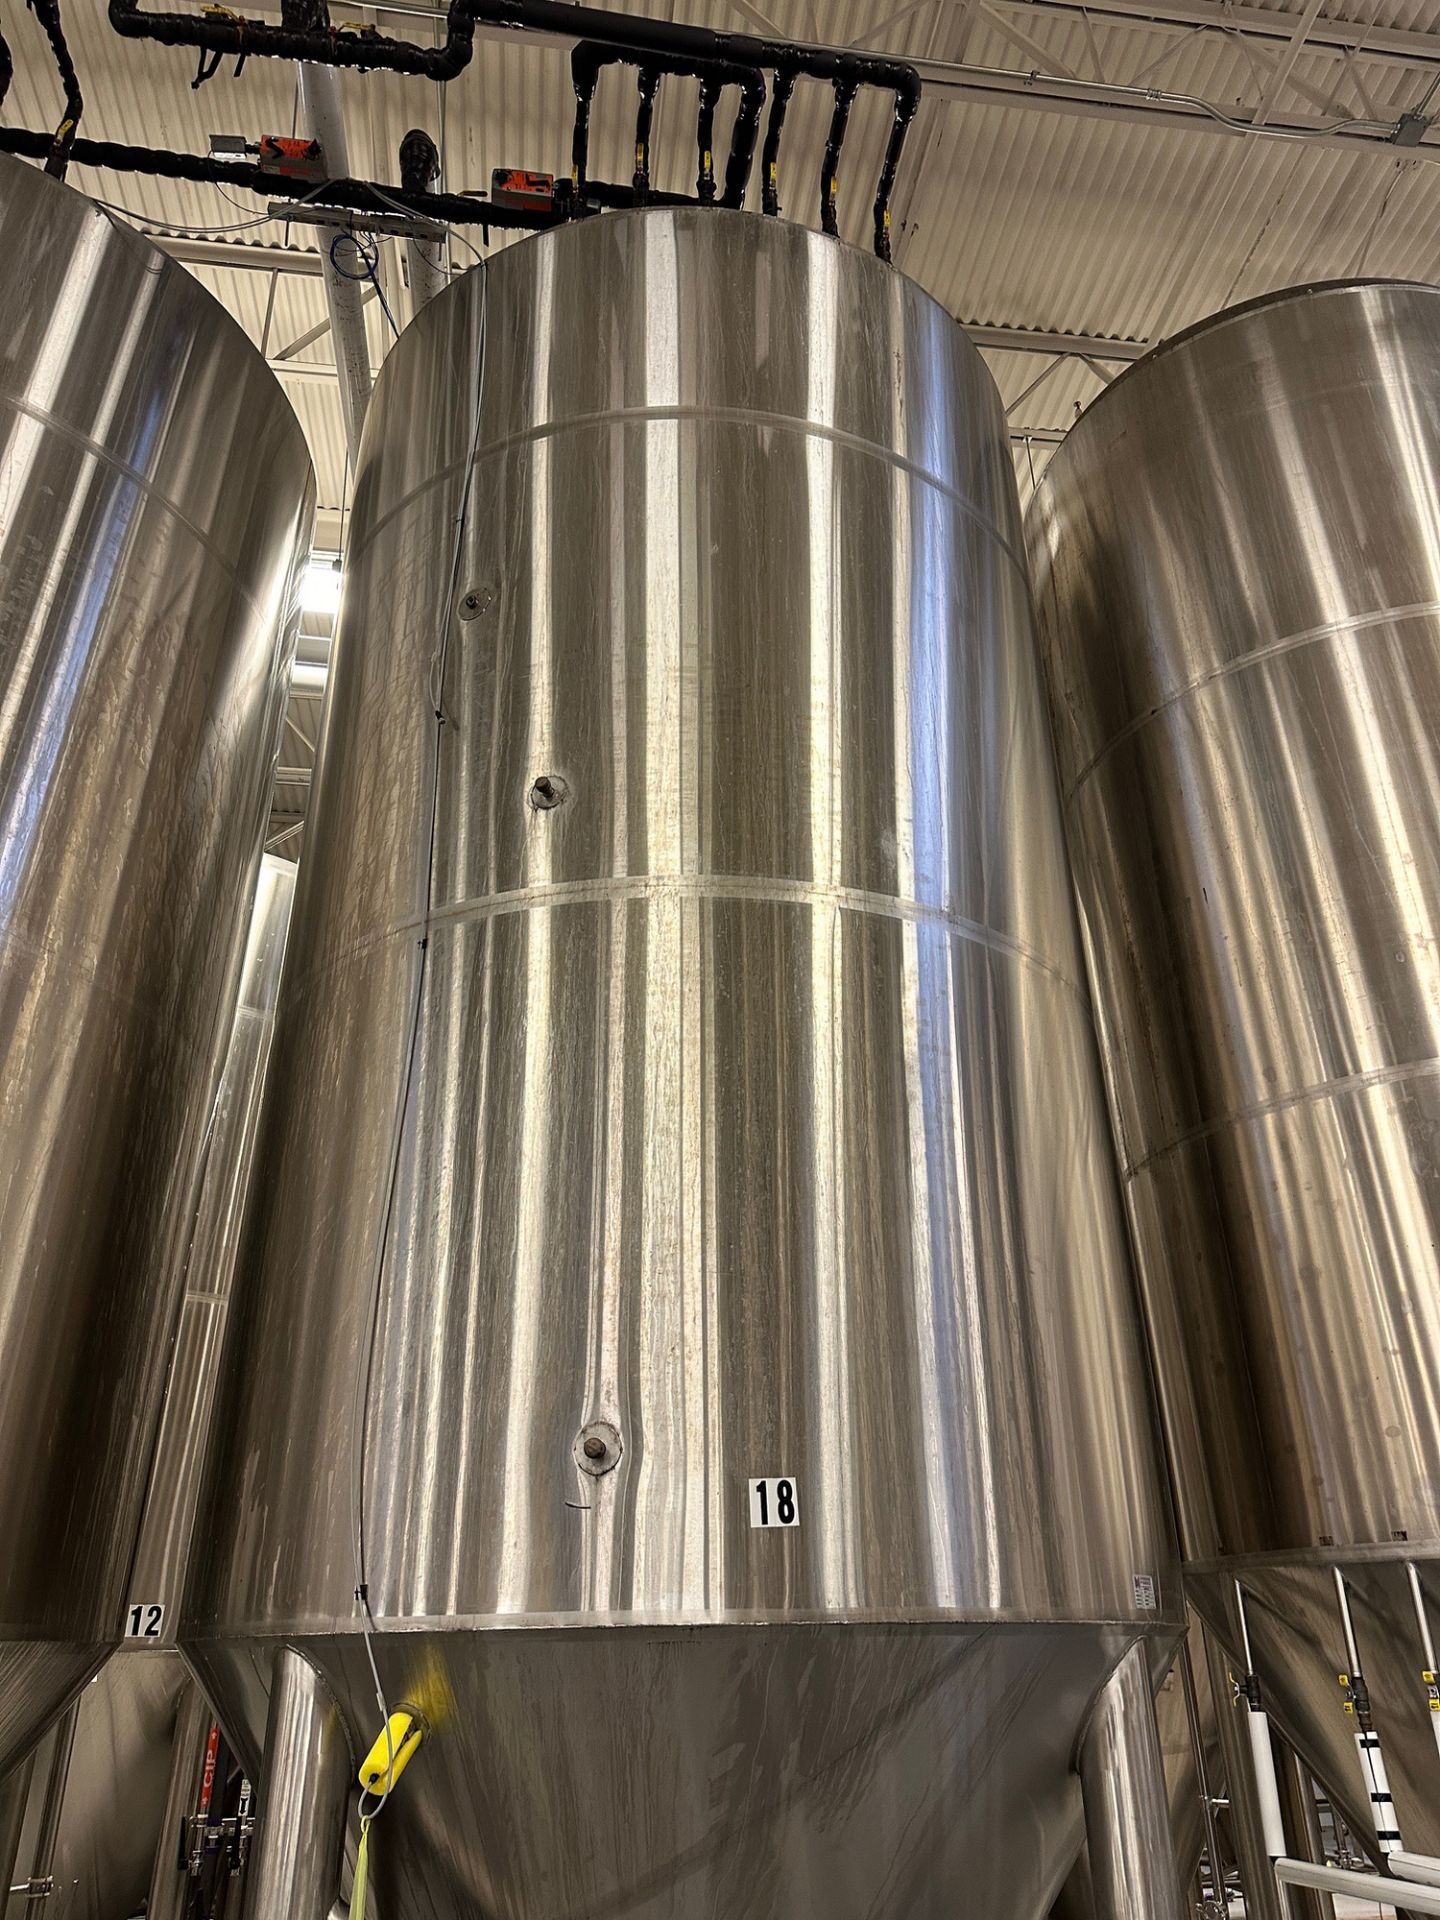 (1 of 8) 2020 Marks 132 BBL FV / 175 BBL or 5400 Gal Max Capacity Fermentation Tank | Rig Fee $2620 - Image 2 of 3